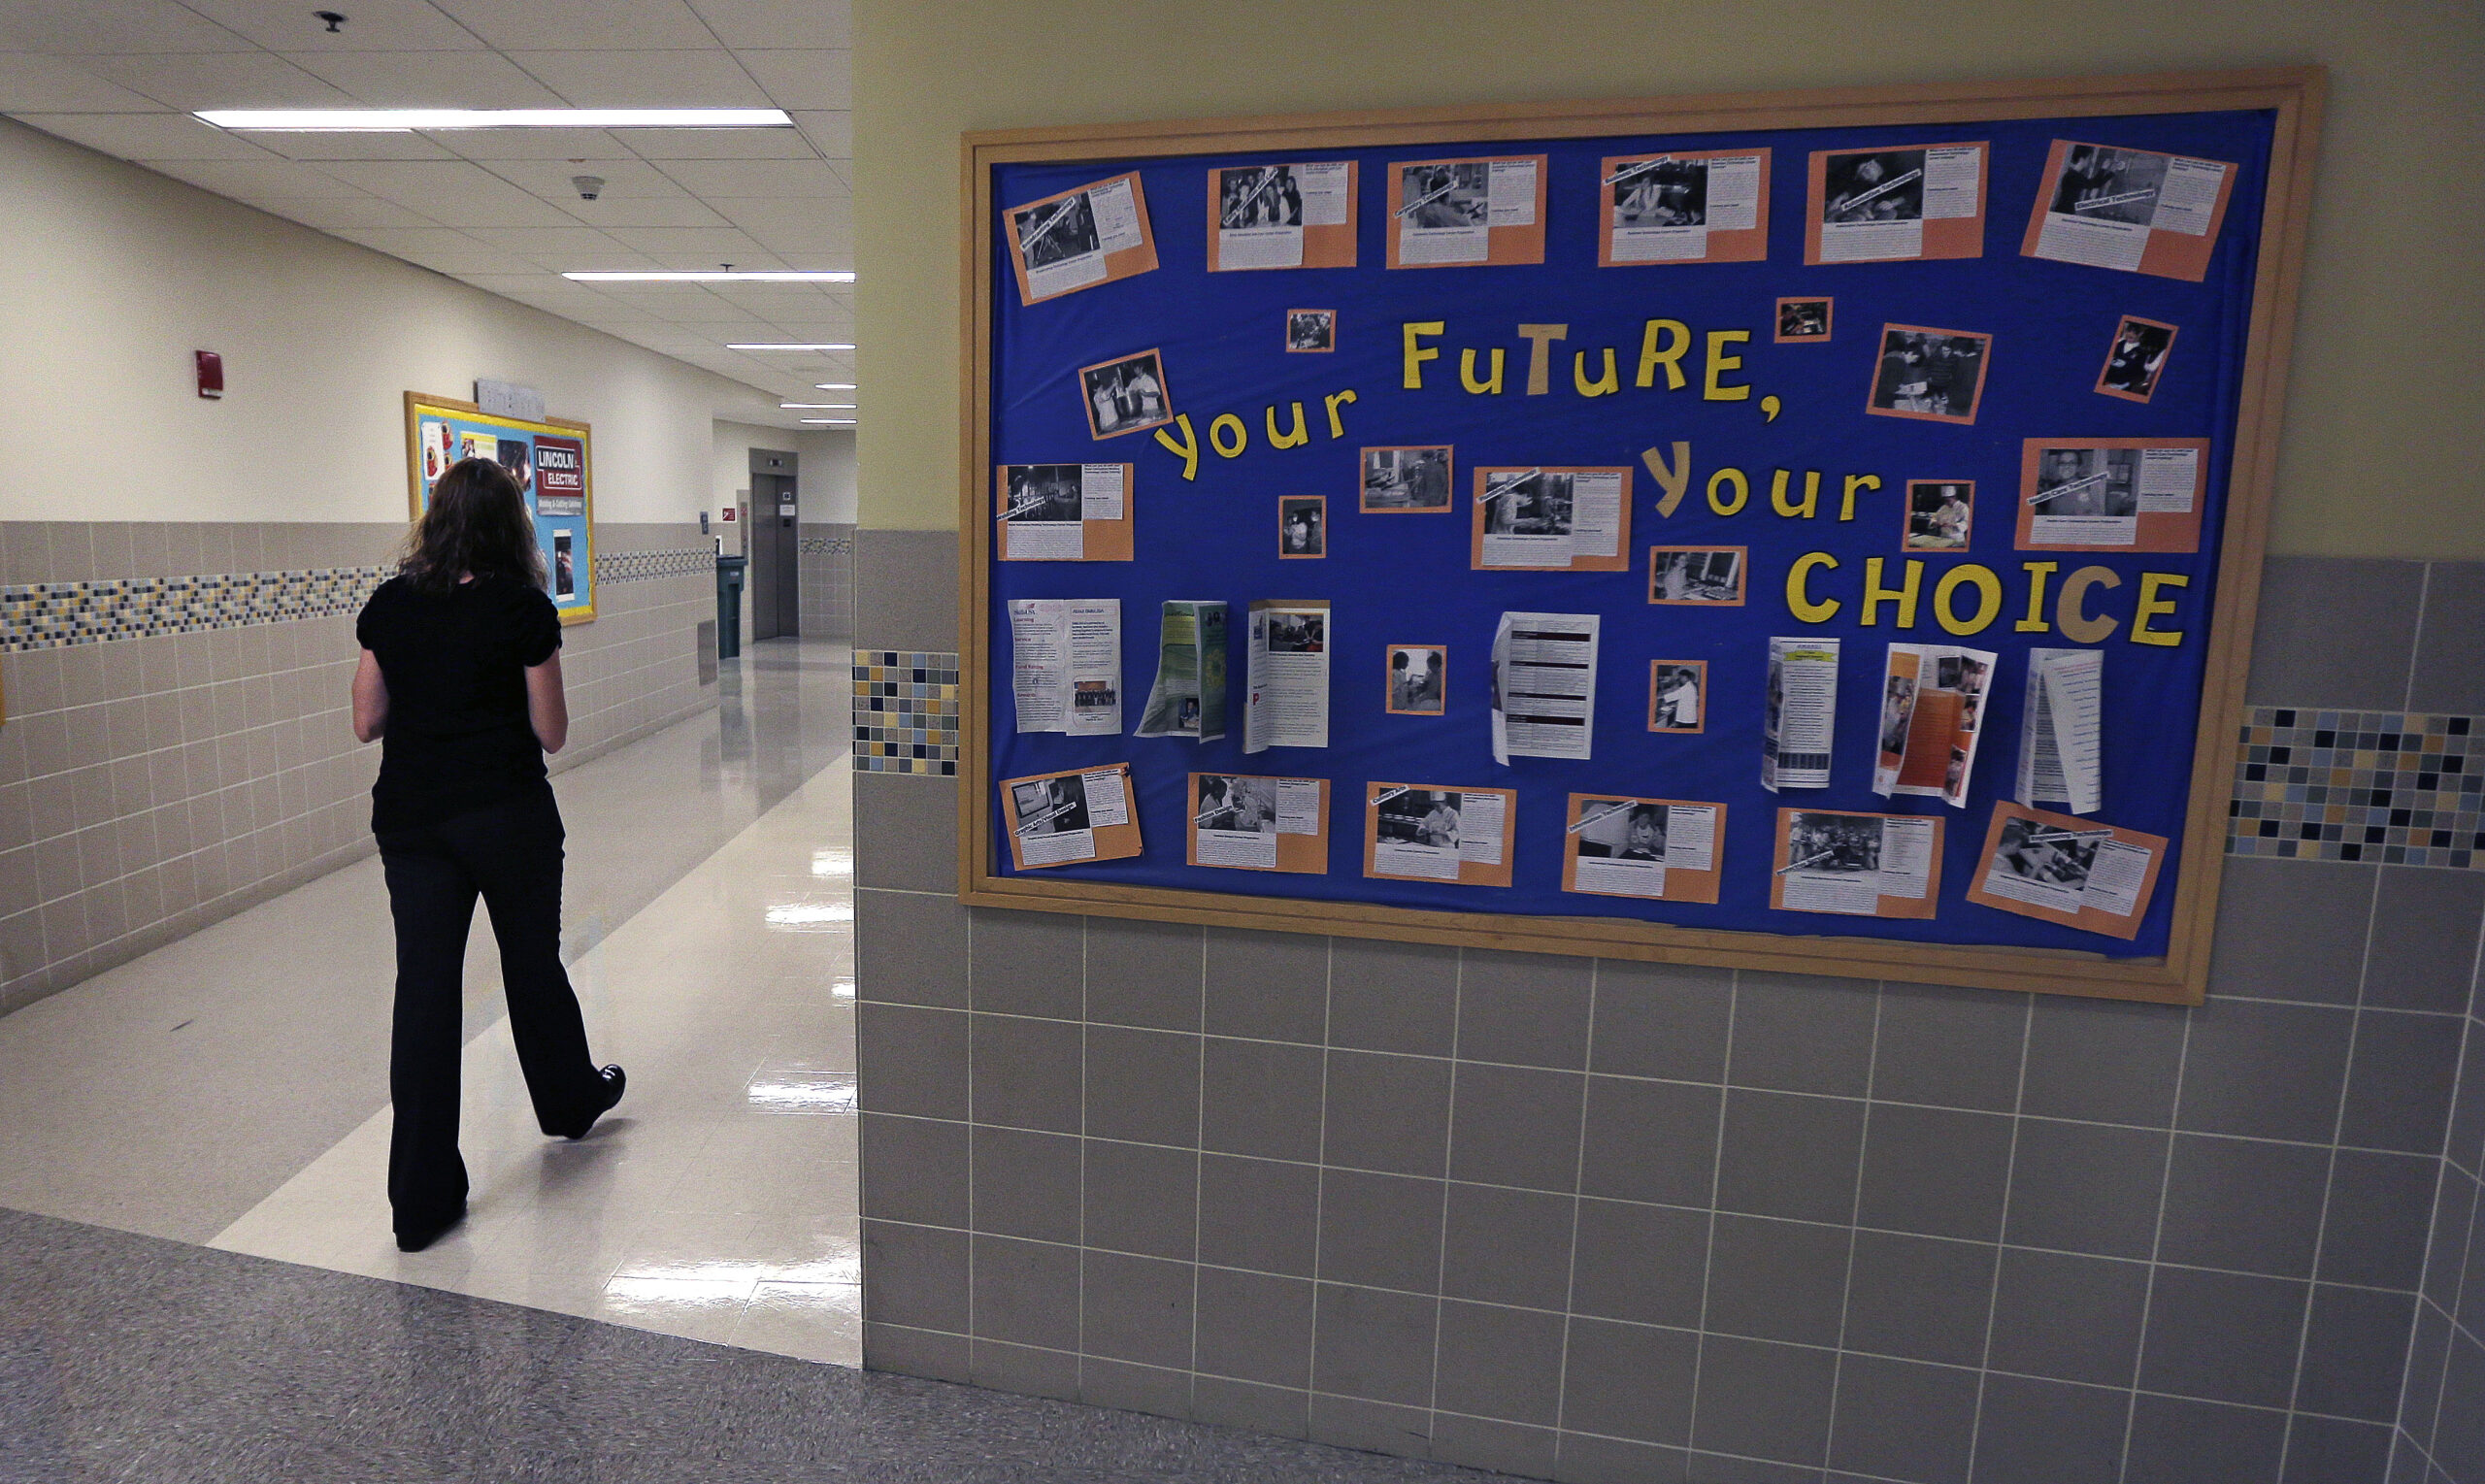 "Your future, your choice" sign in school hallway